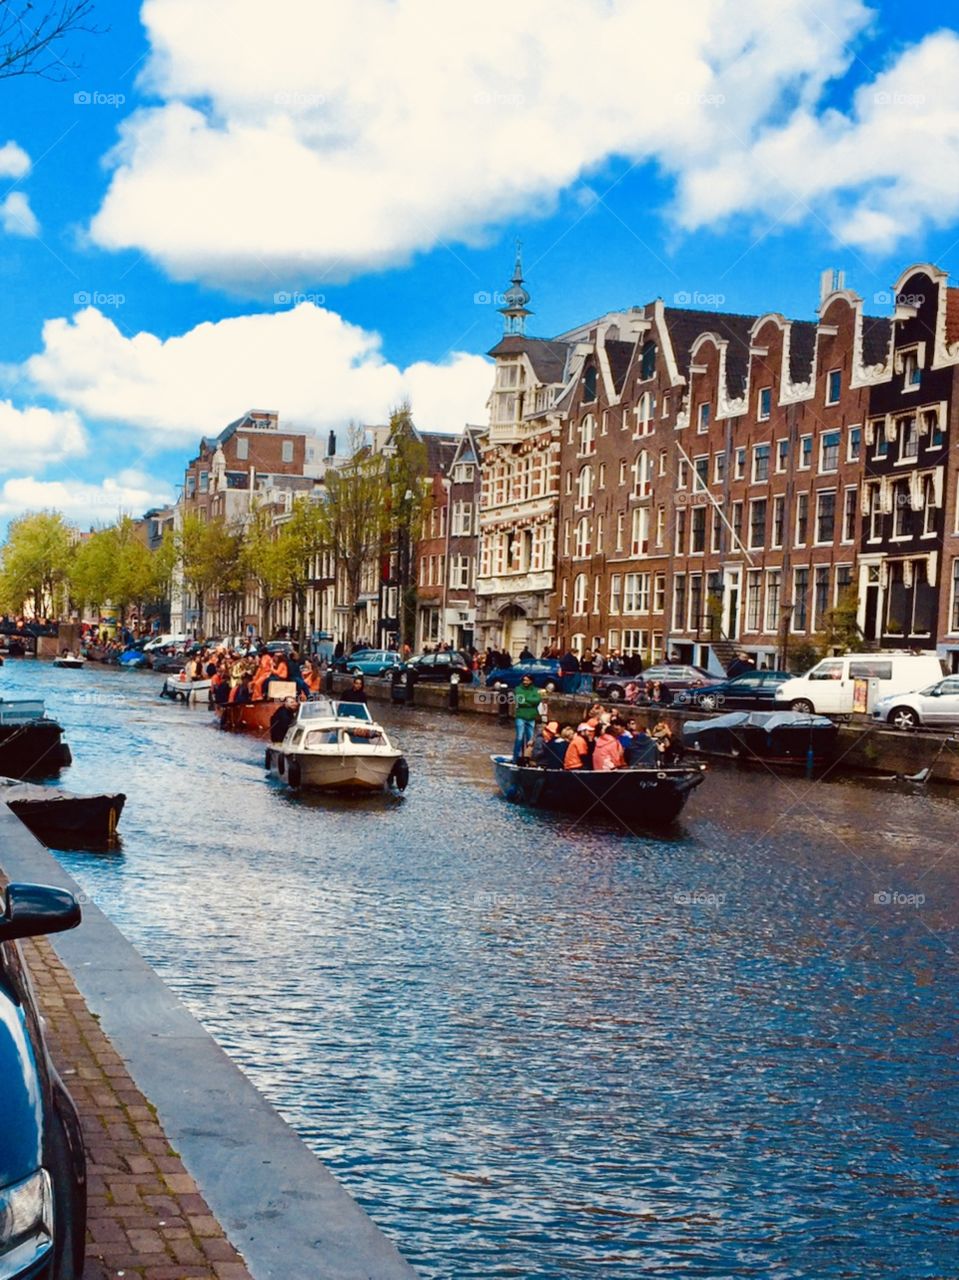 Enchanted Waters , streaming canals , the Dutch Welcome you 